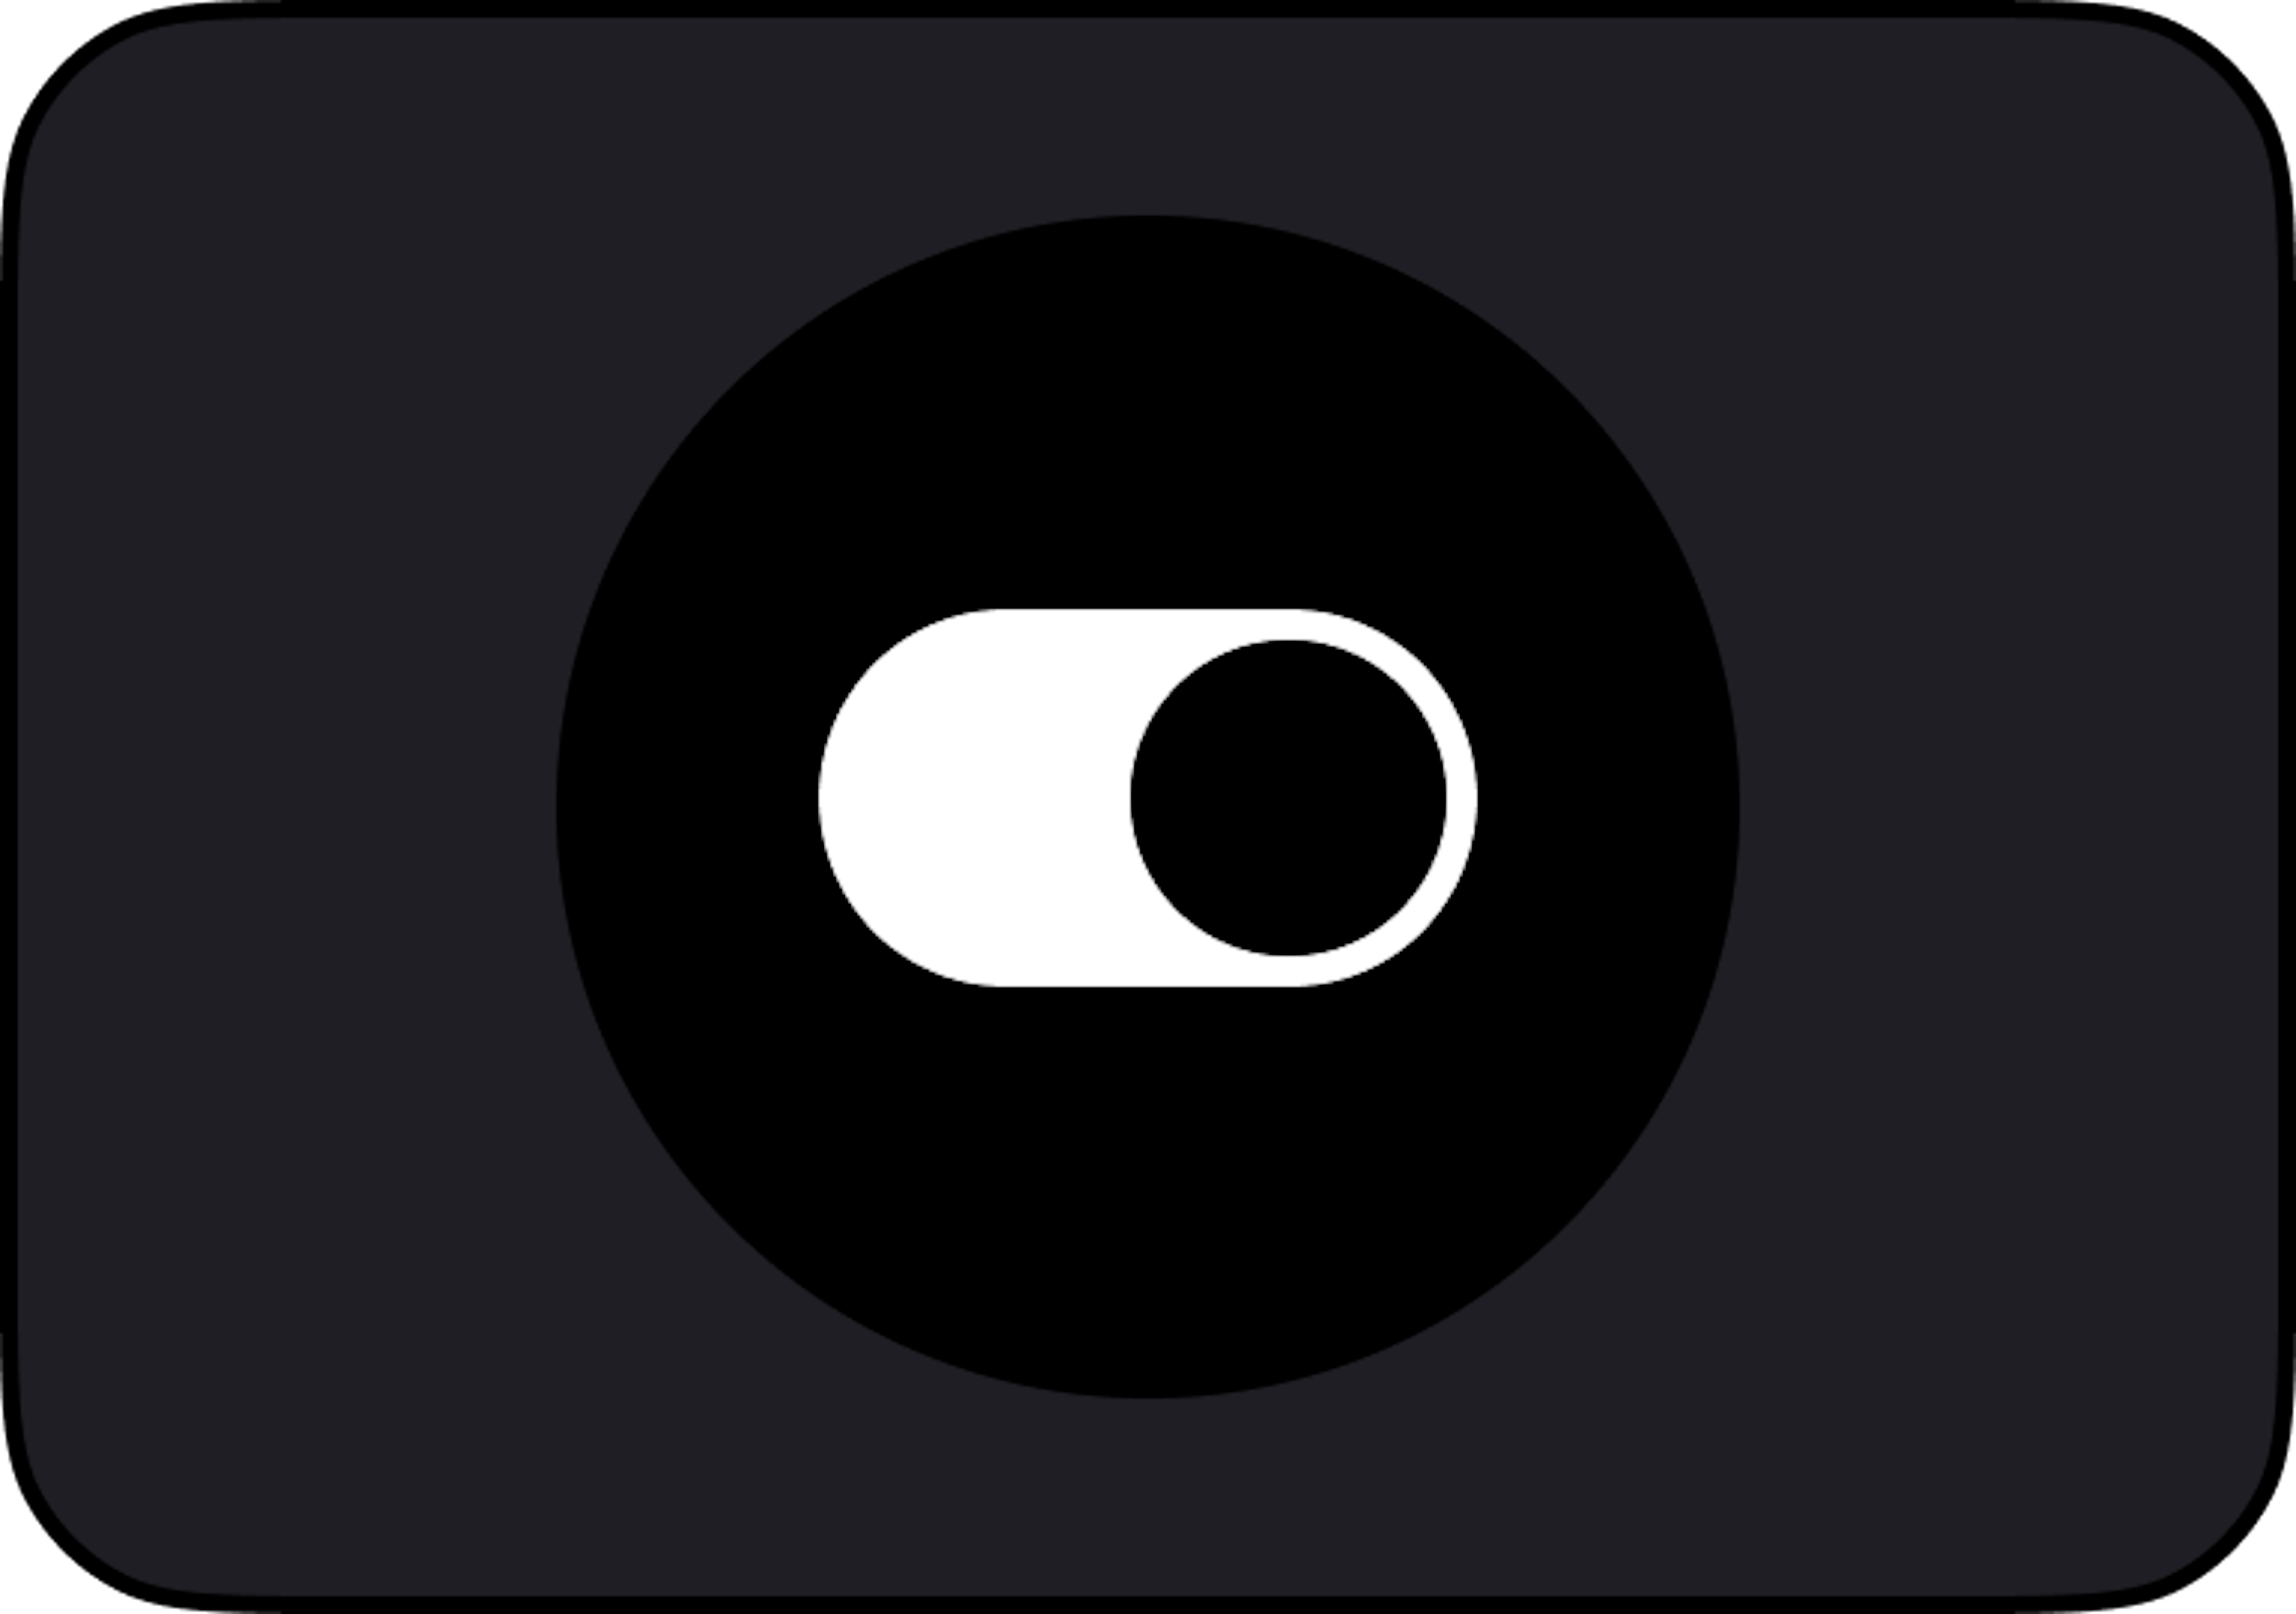 Black toggle button with white circle for Volvo On Demand logo